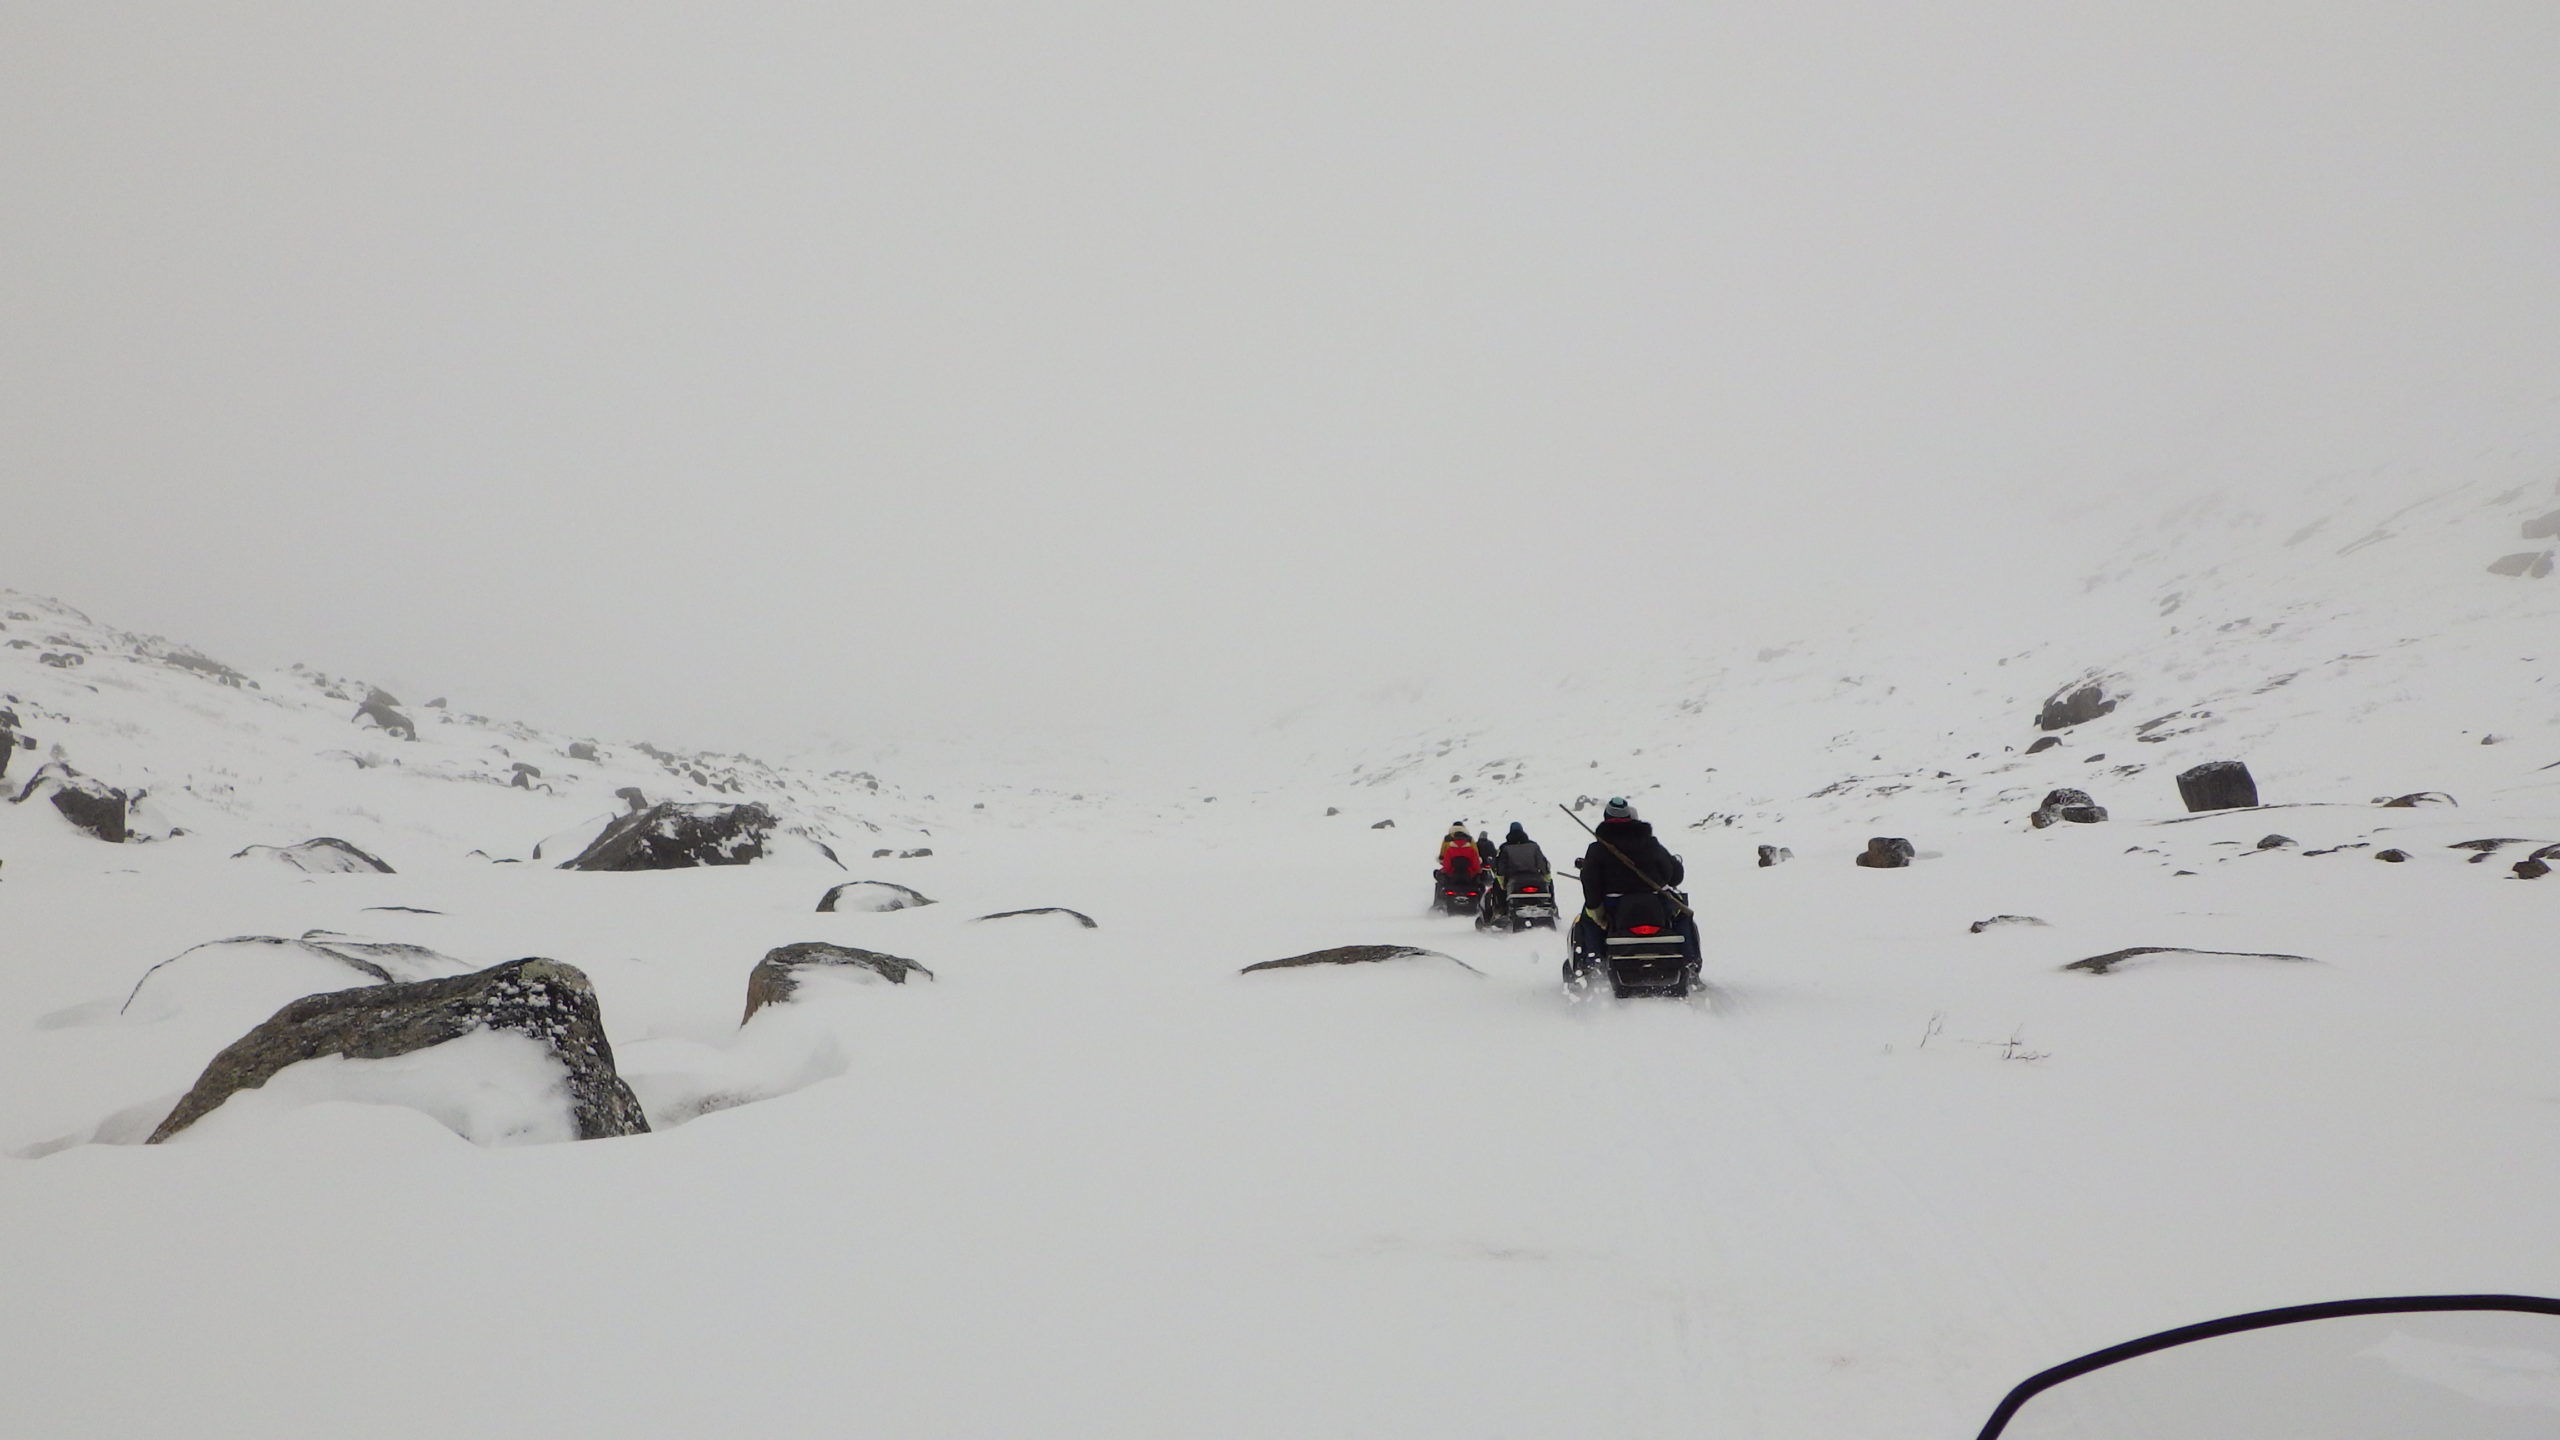 A group of people riding snowmobiles on a wintery day